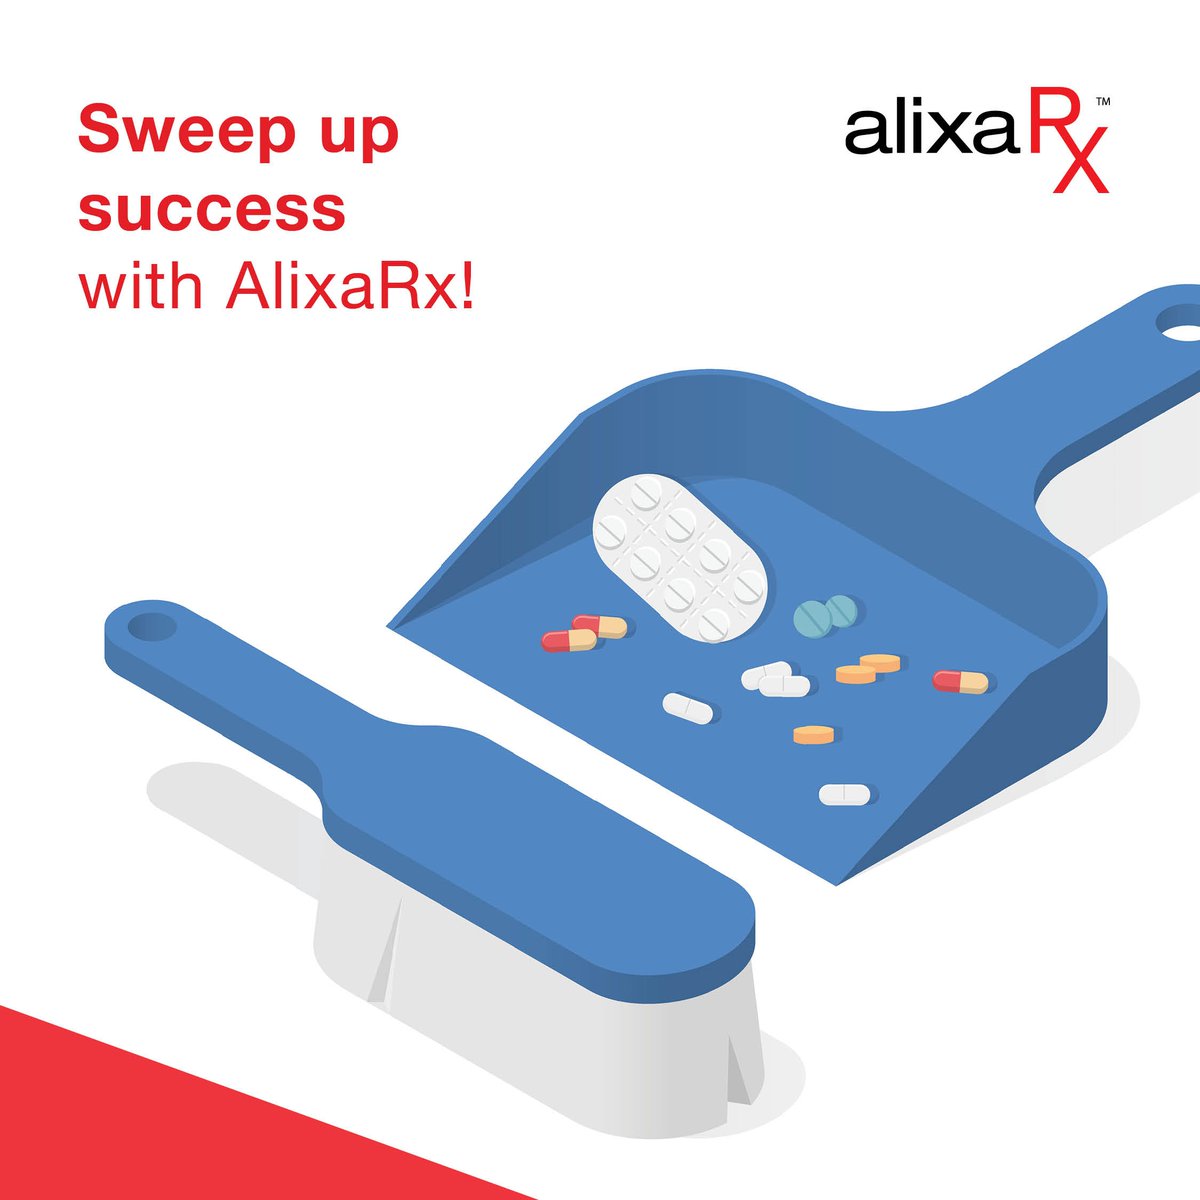 At AlixaRx, we understand that medication disposal can be cumbersome. We can take care of this non-billable task for you to make the process more efficient and streamlined. It’s a clean-up we can handle!

Visit:
AlixaRx.com

#AlixaRx #MedicationUse #PharmacyCost